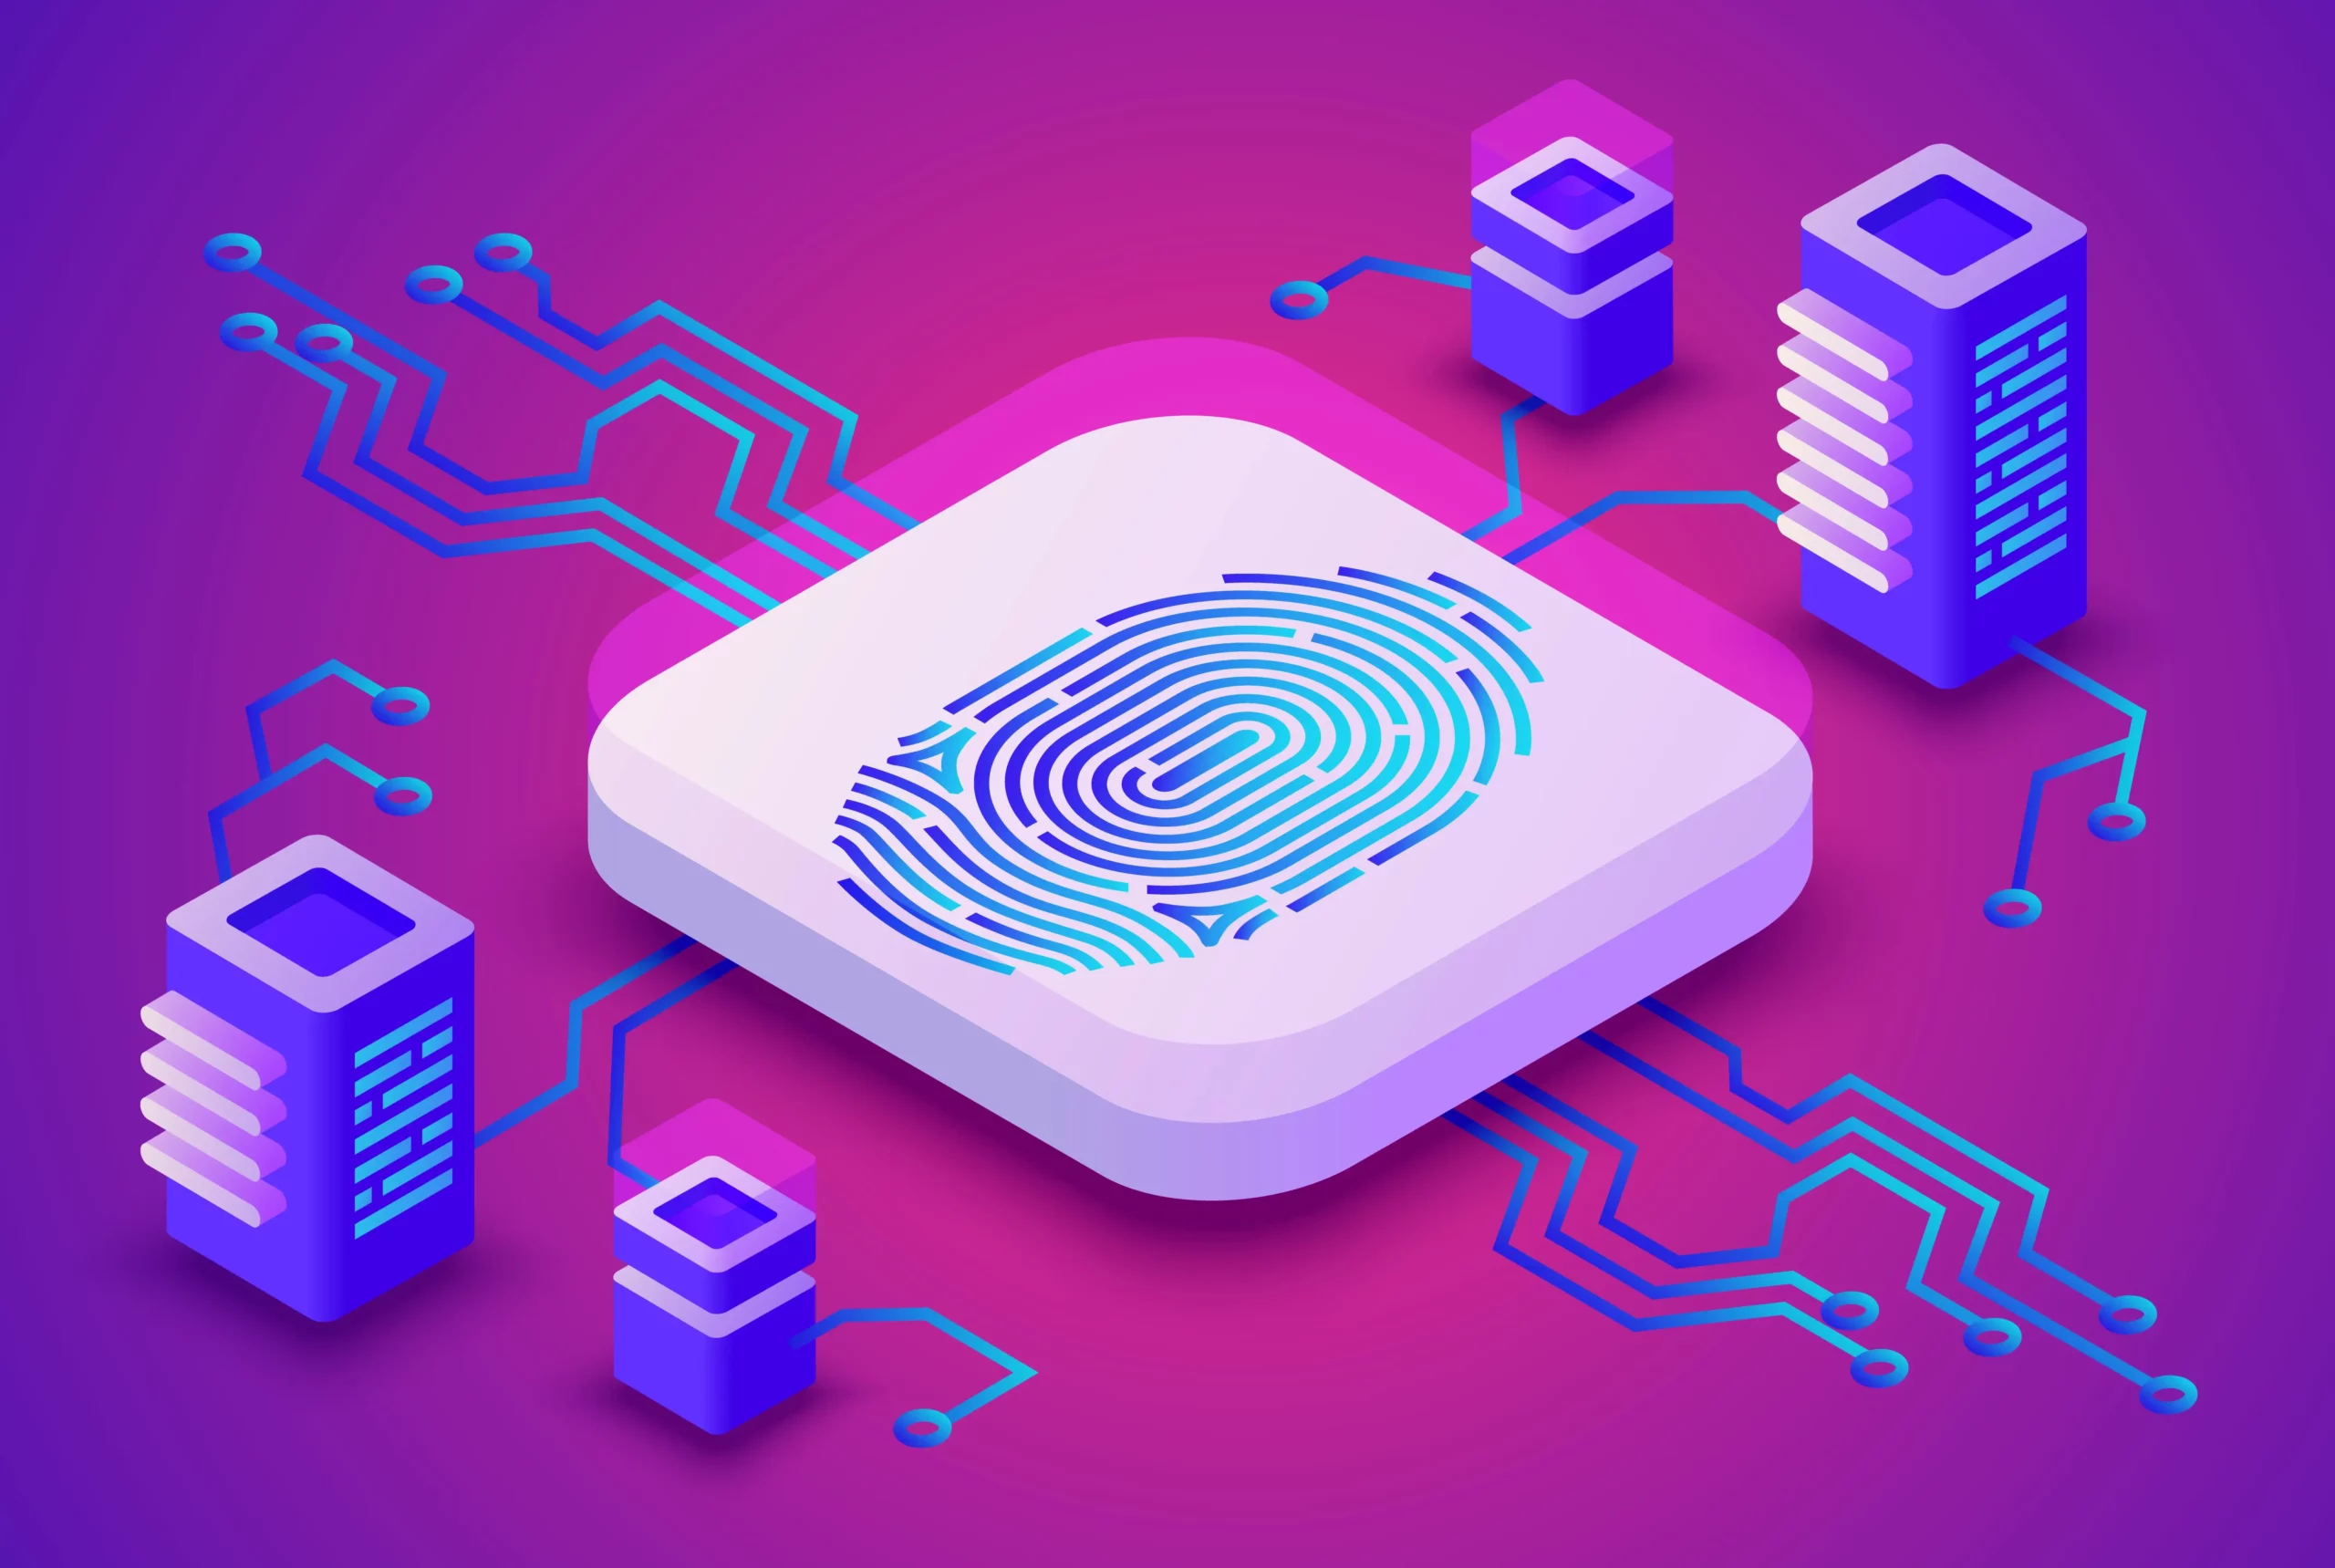 Illustration of a digital fingerprint on a central platform connected to multiple server towers, symbolizing cybersecurity and data protection.